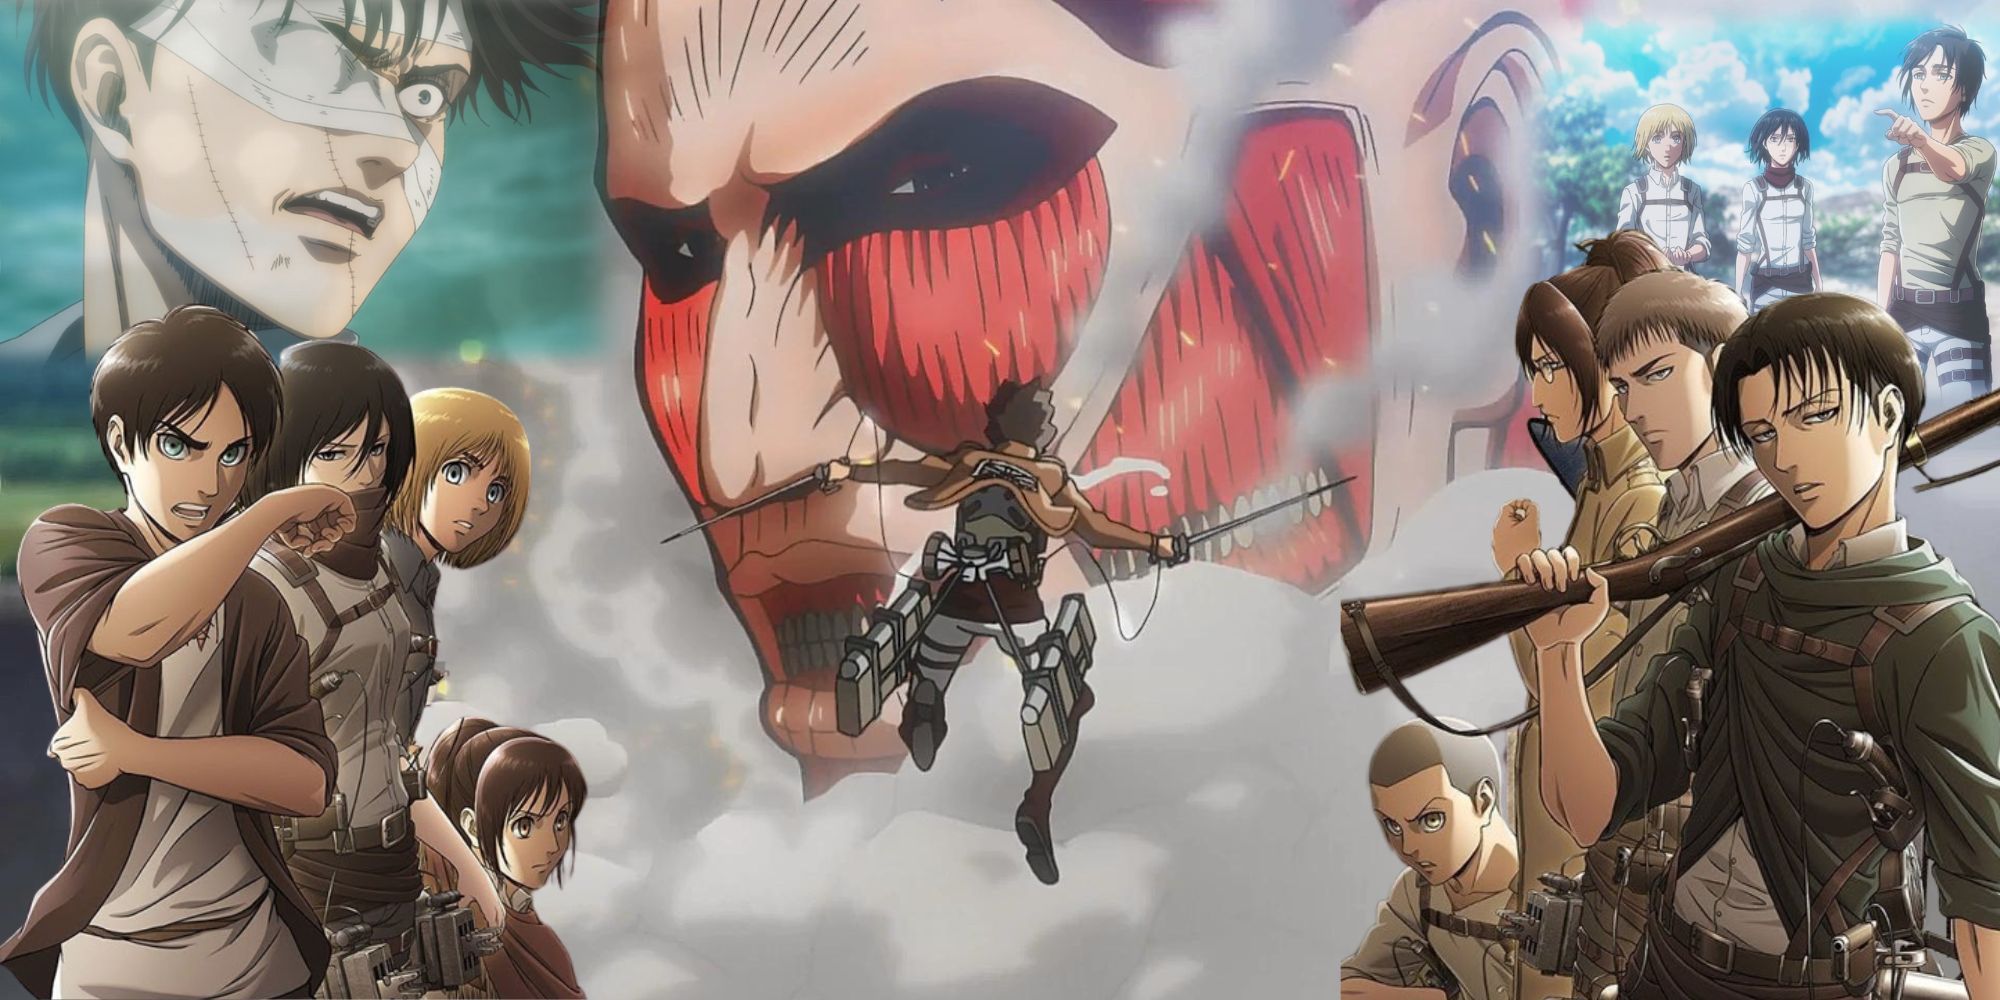 Blended image of a colossal titan looking at Eren in mid air with other characters surrounding the frame from Attack on Titan